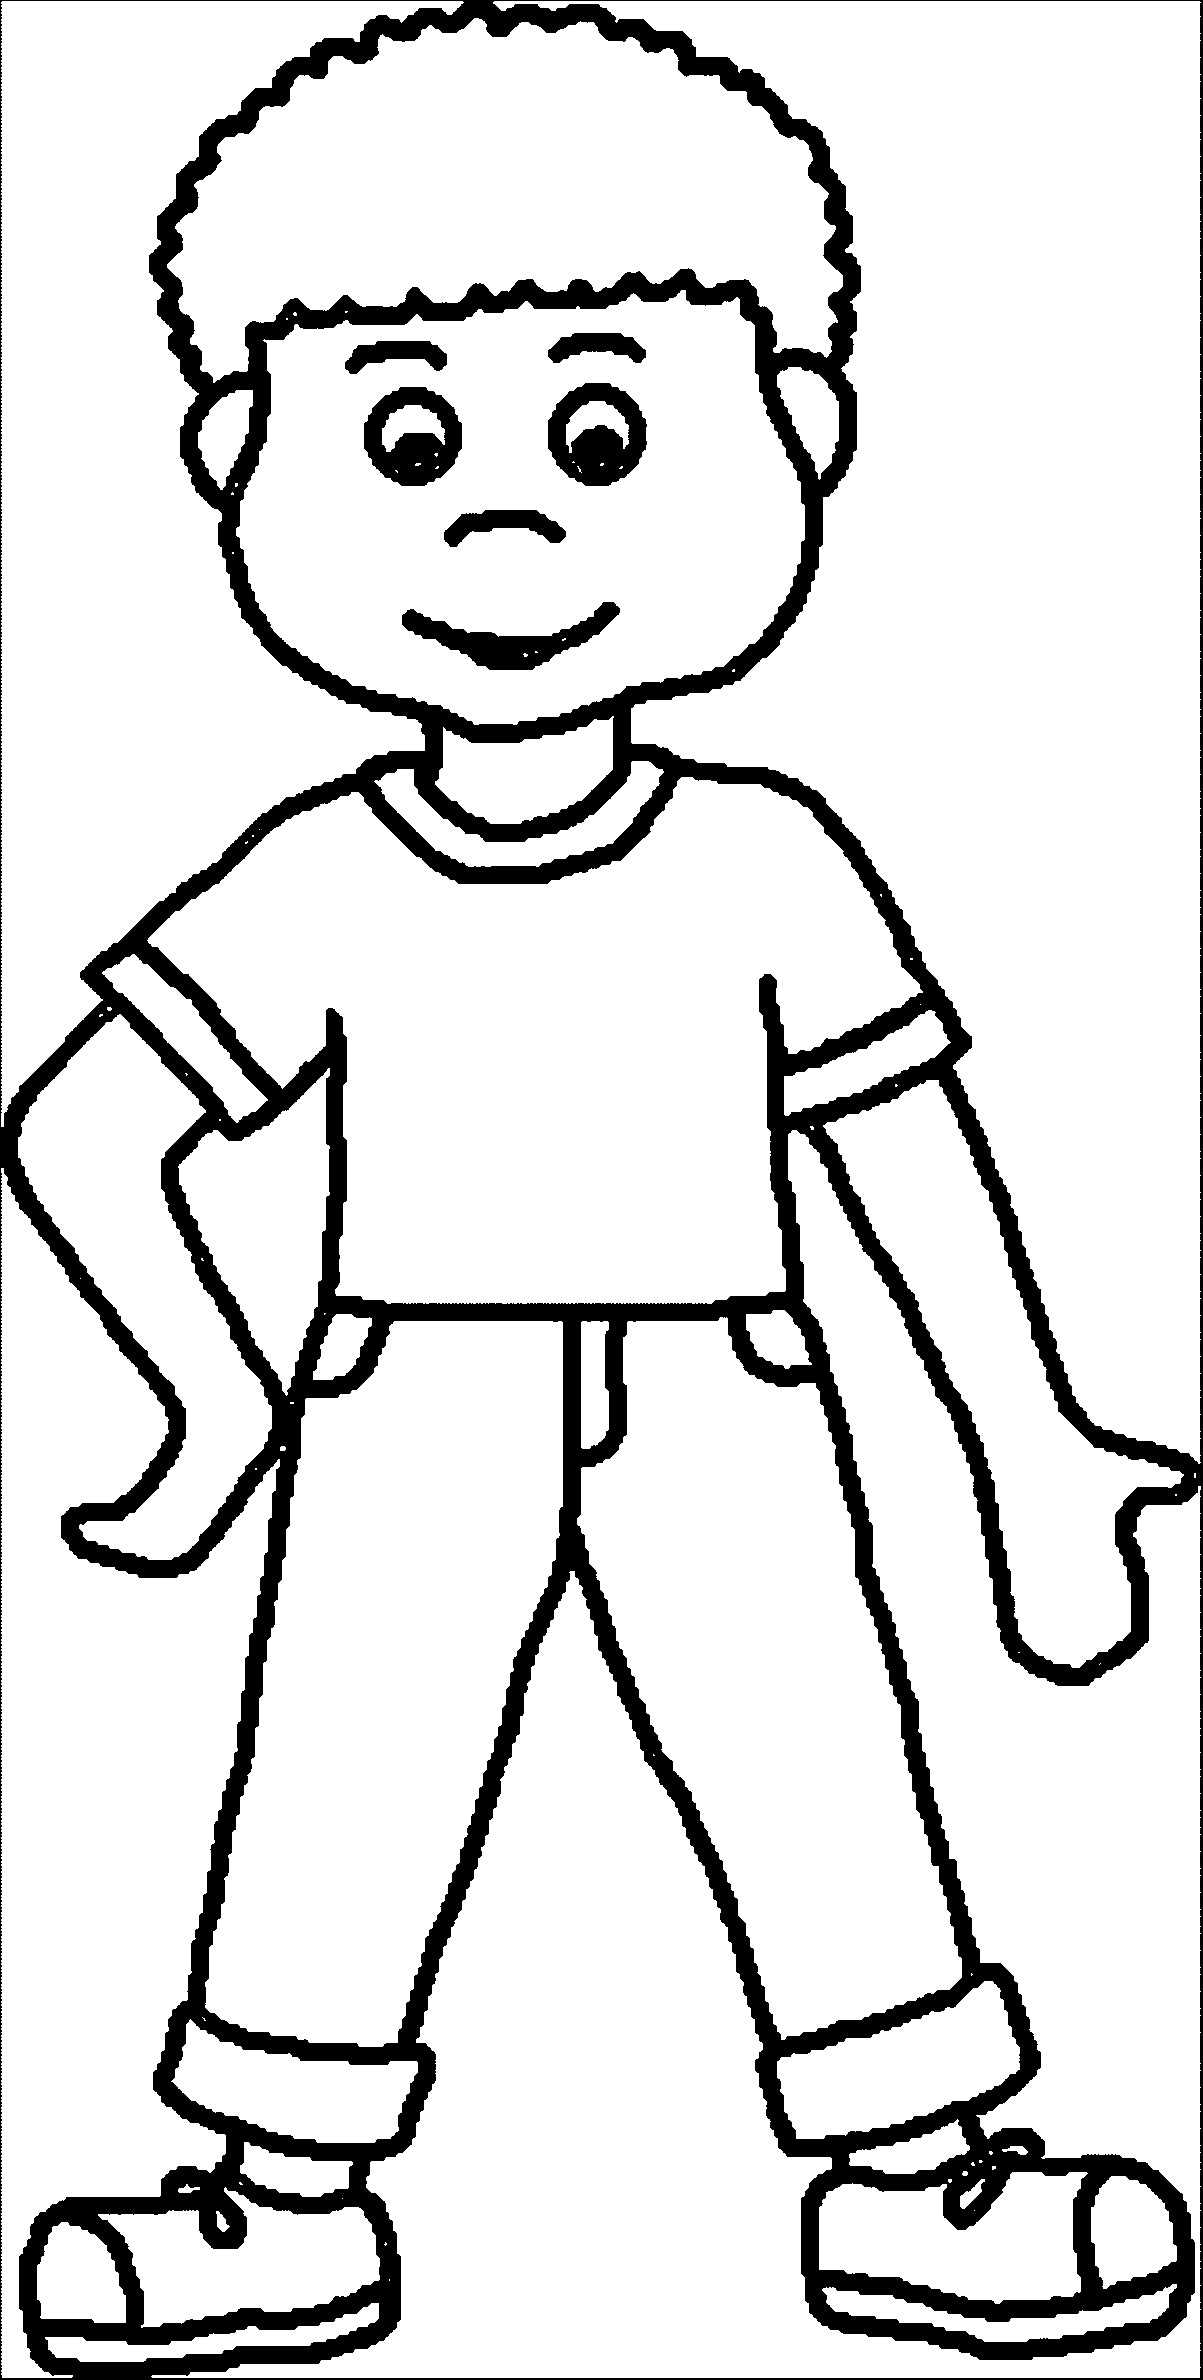 Coloring Sheets Of Boys
 Color clipart boy coloring Pencil and in color color